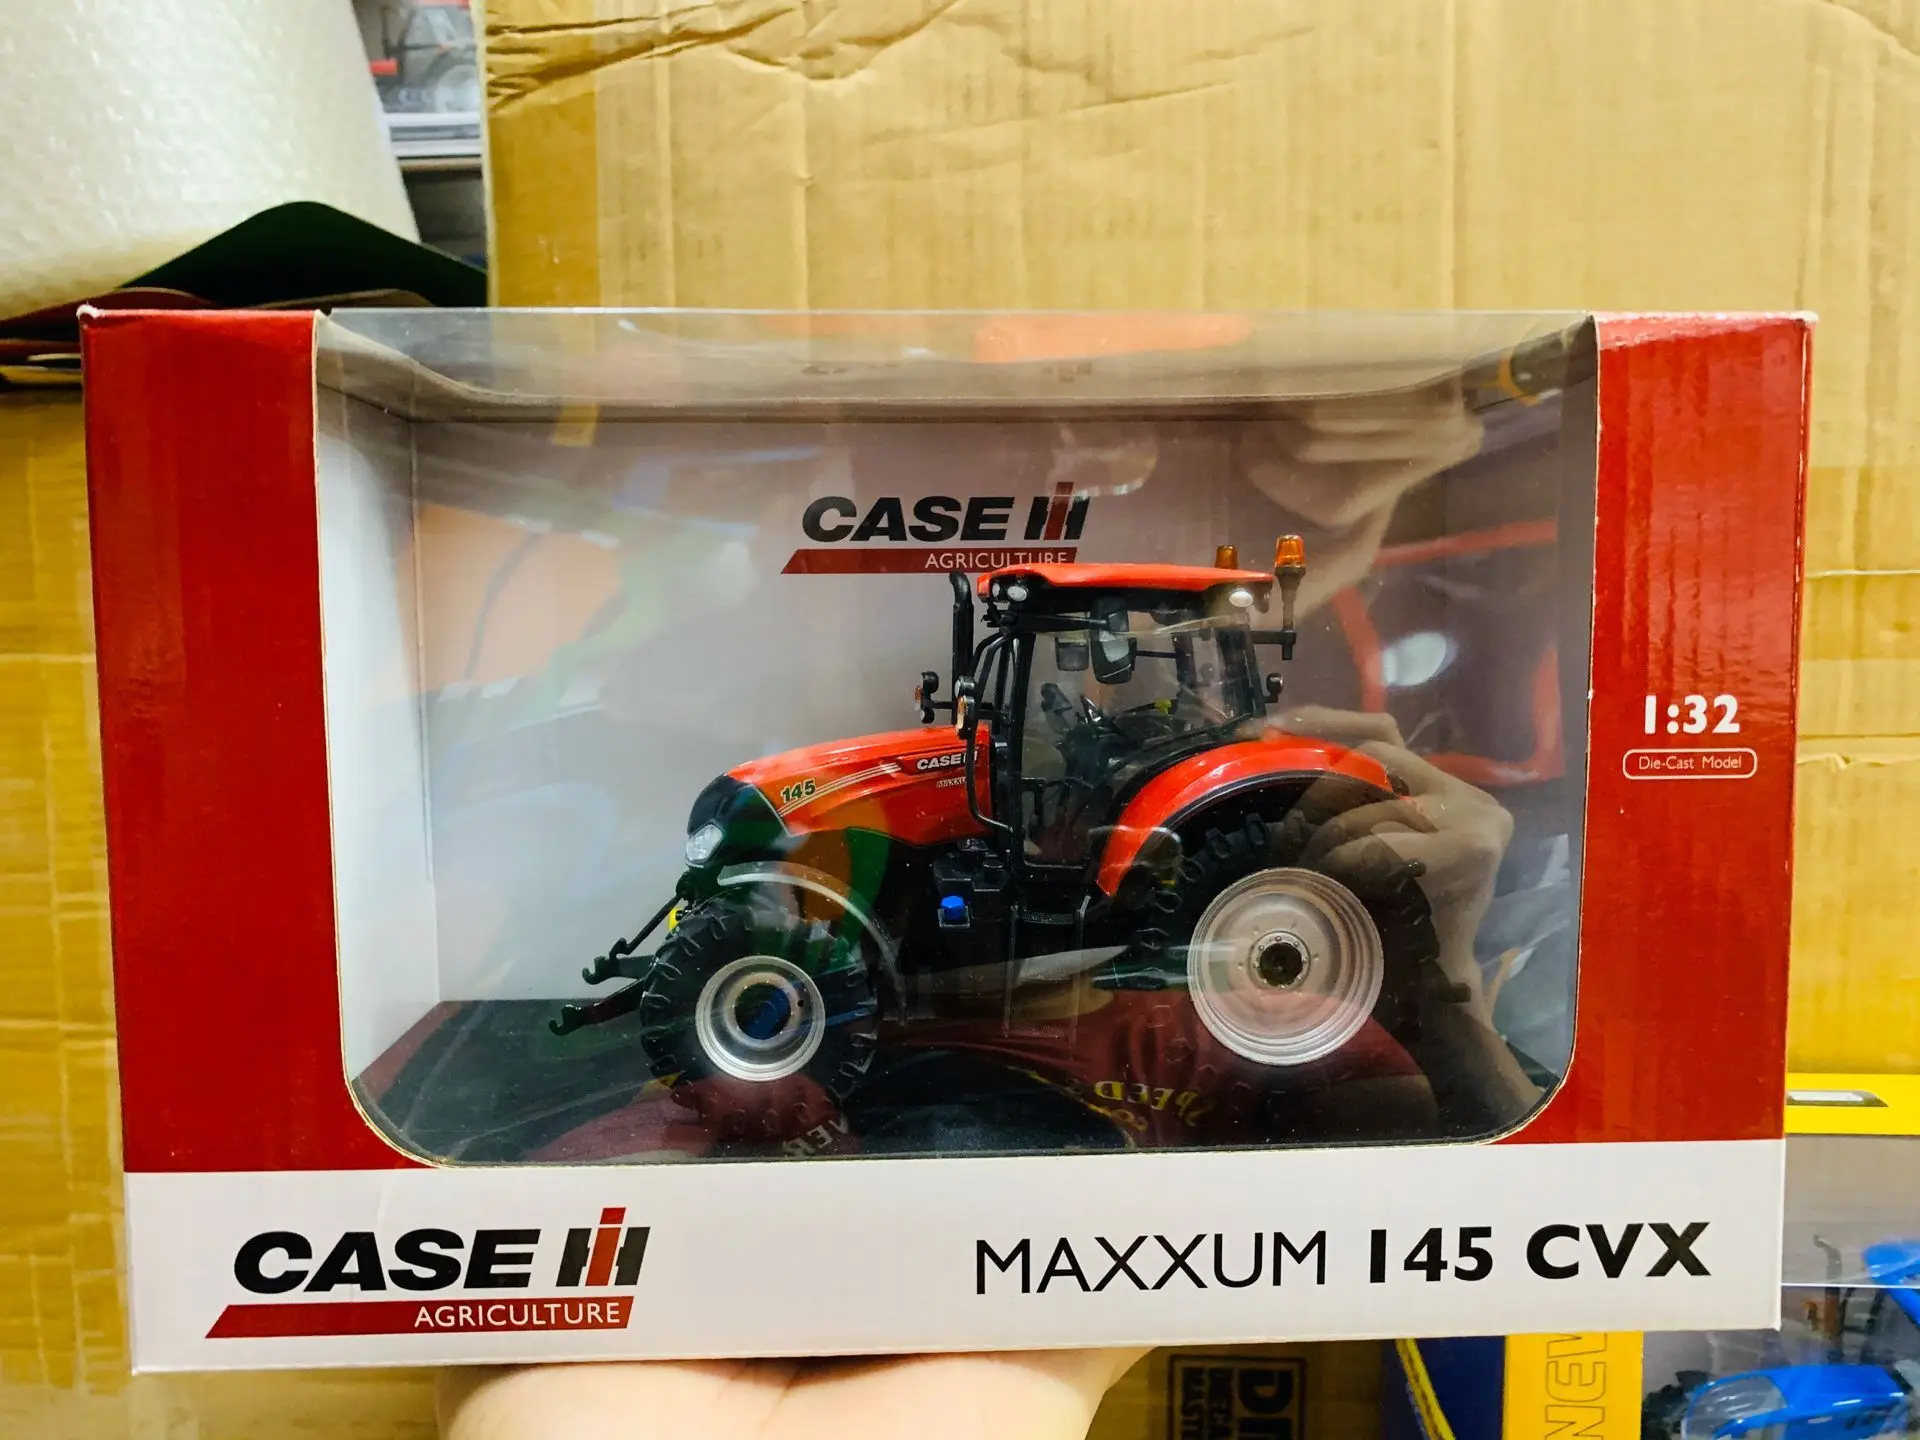 

1:32 Scale Die-Cast Model Case IH Maxxum 145 CVX 2017 Version Agricultural Tractor UH5266 New in Box